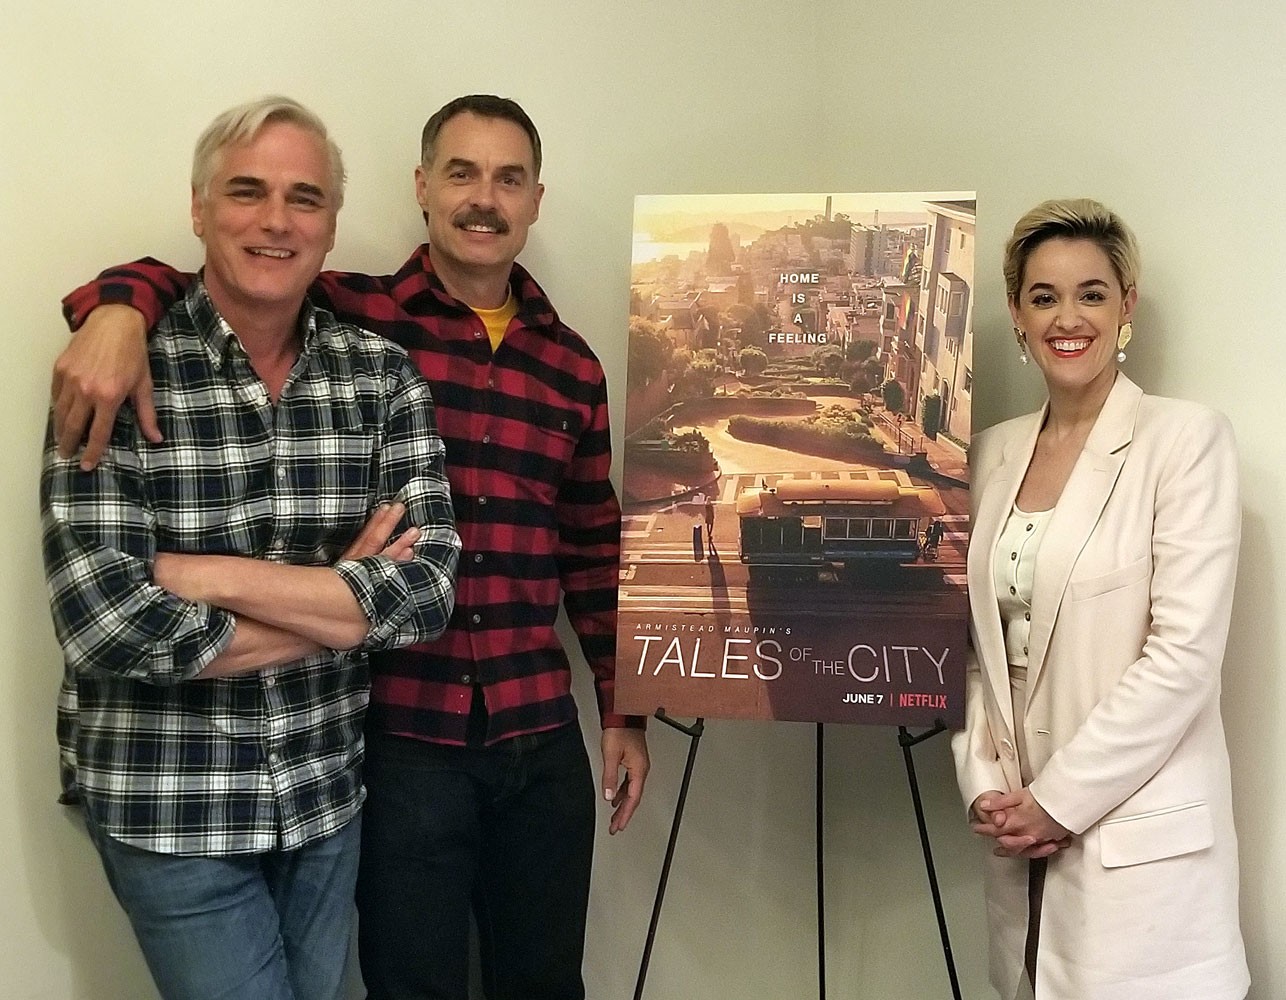 Paul Gross, Murray Bartlett and Lauren Morelli of Tales of the City